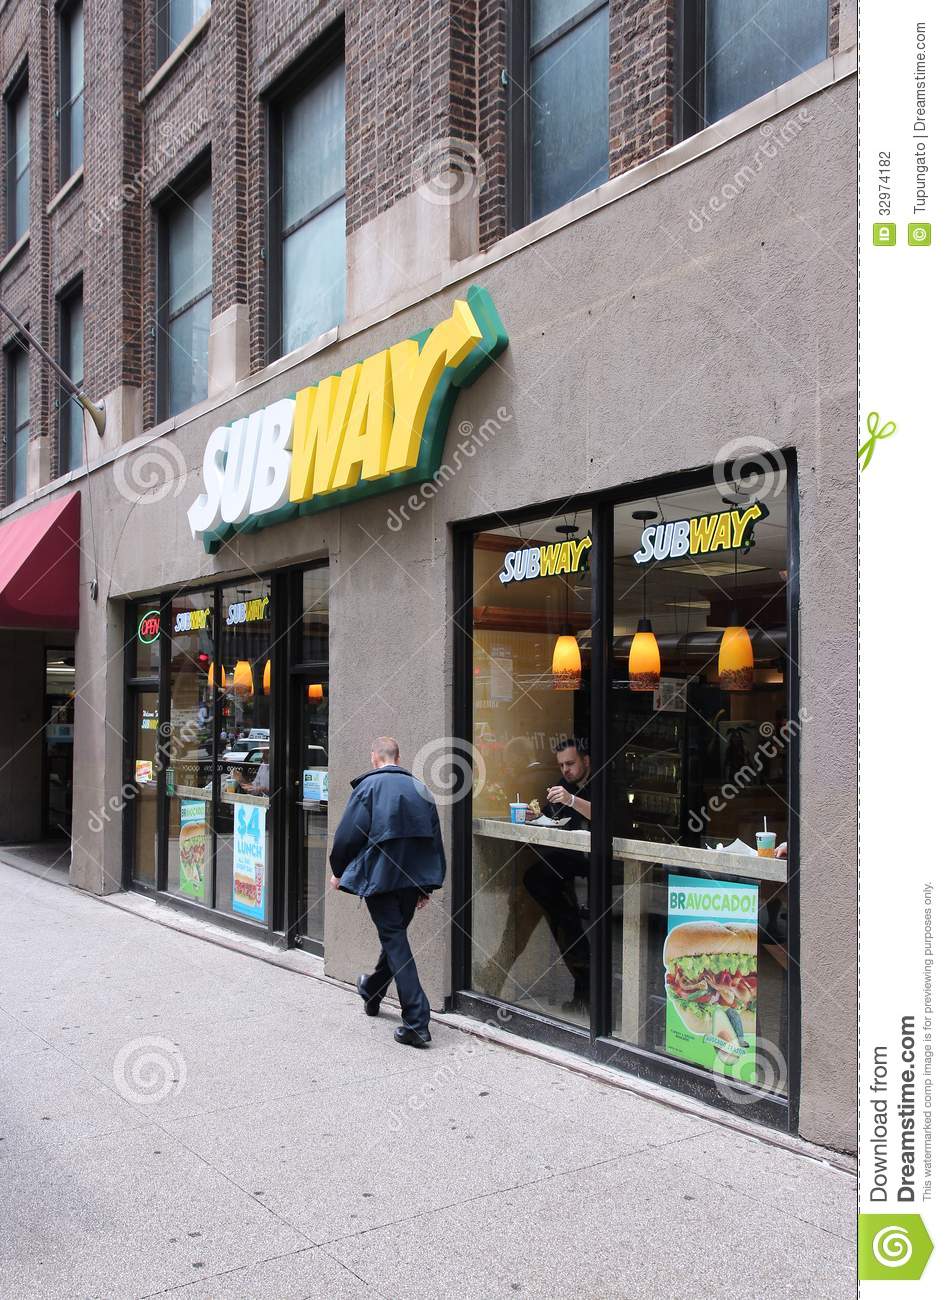 Subway Sandwich Store On June 26 2013 In Chicago Subway Is One Of